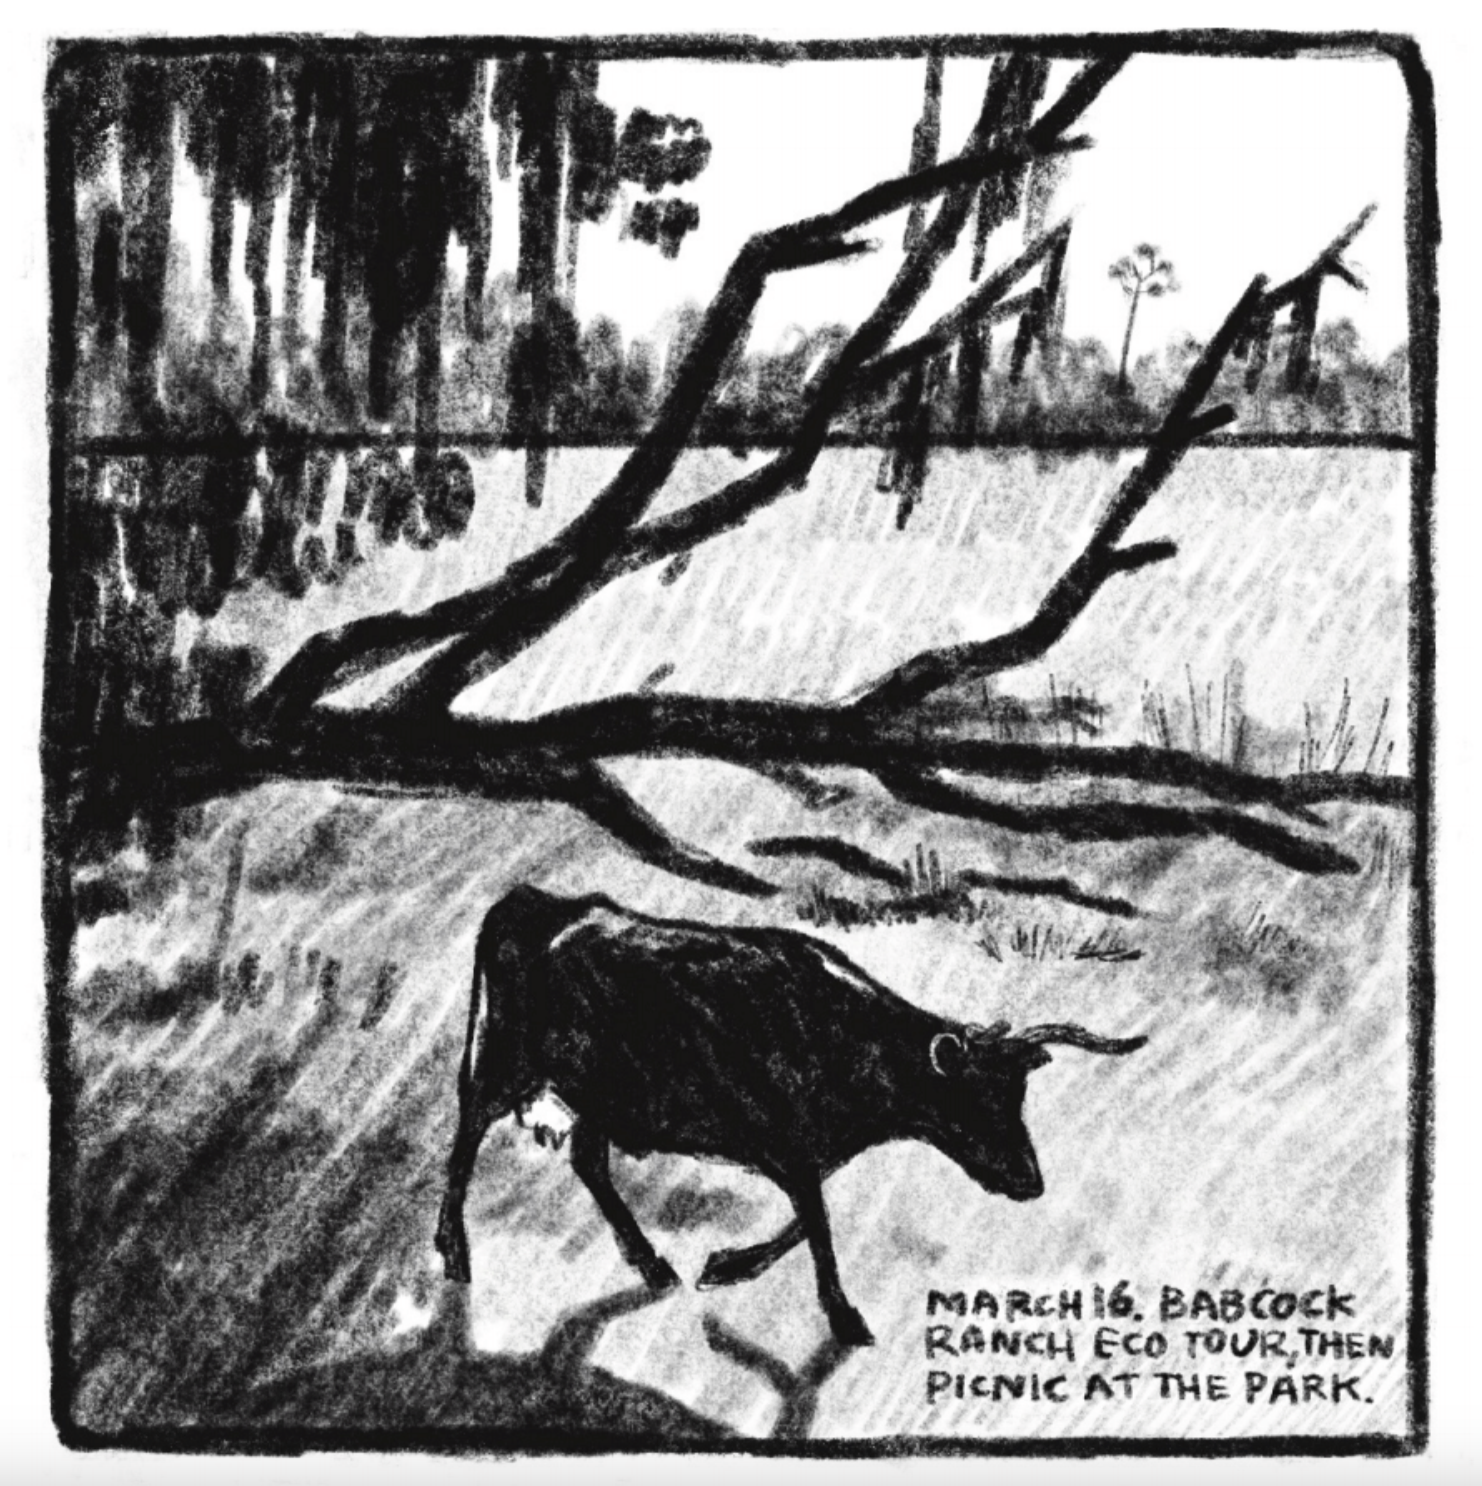 A nature view, with trees on the horizon line and tree branches and Spanish moss in the foreground. A bull walks below the branches. 
Description reads: "March 16. Babcock Ranch Eco Tour, then picnic at the park." 